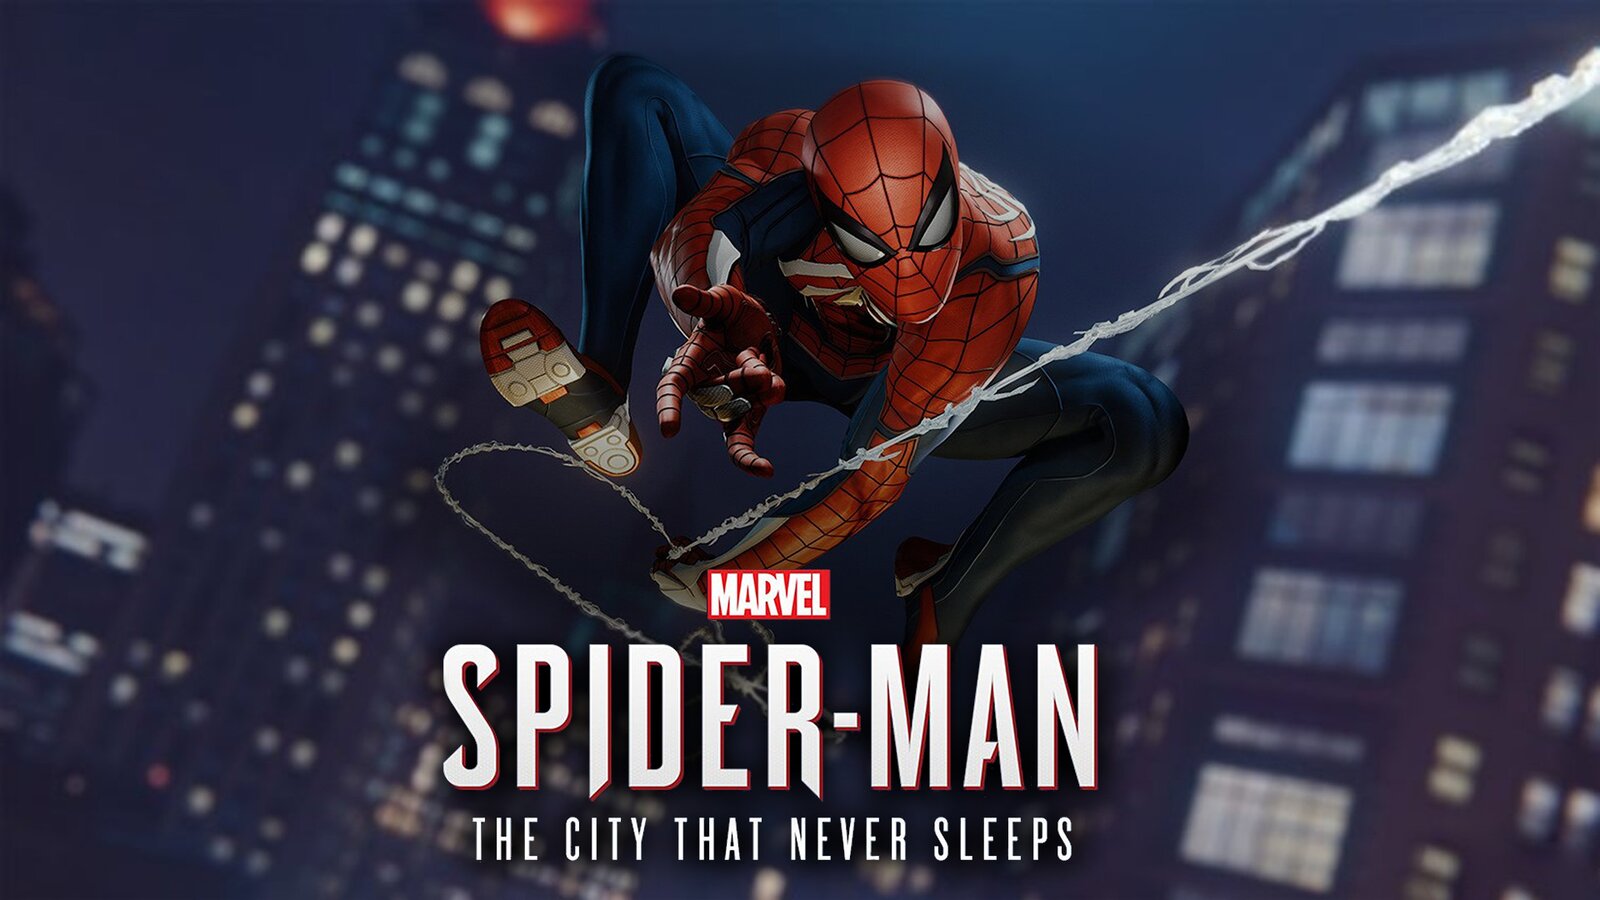 Marvel's Spider-Man: The City that Never Sleeps